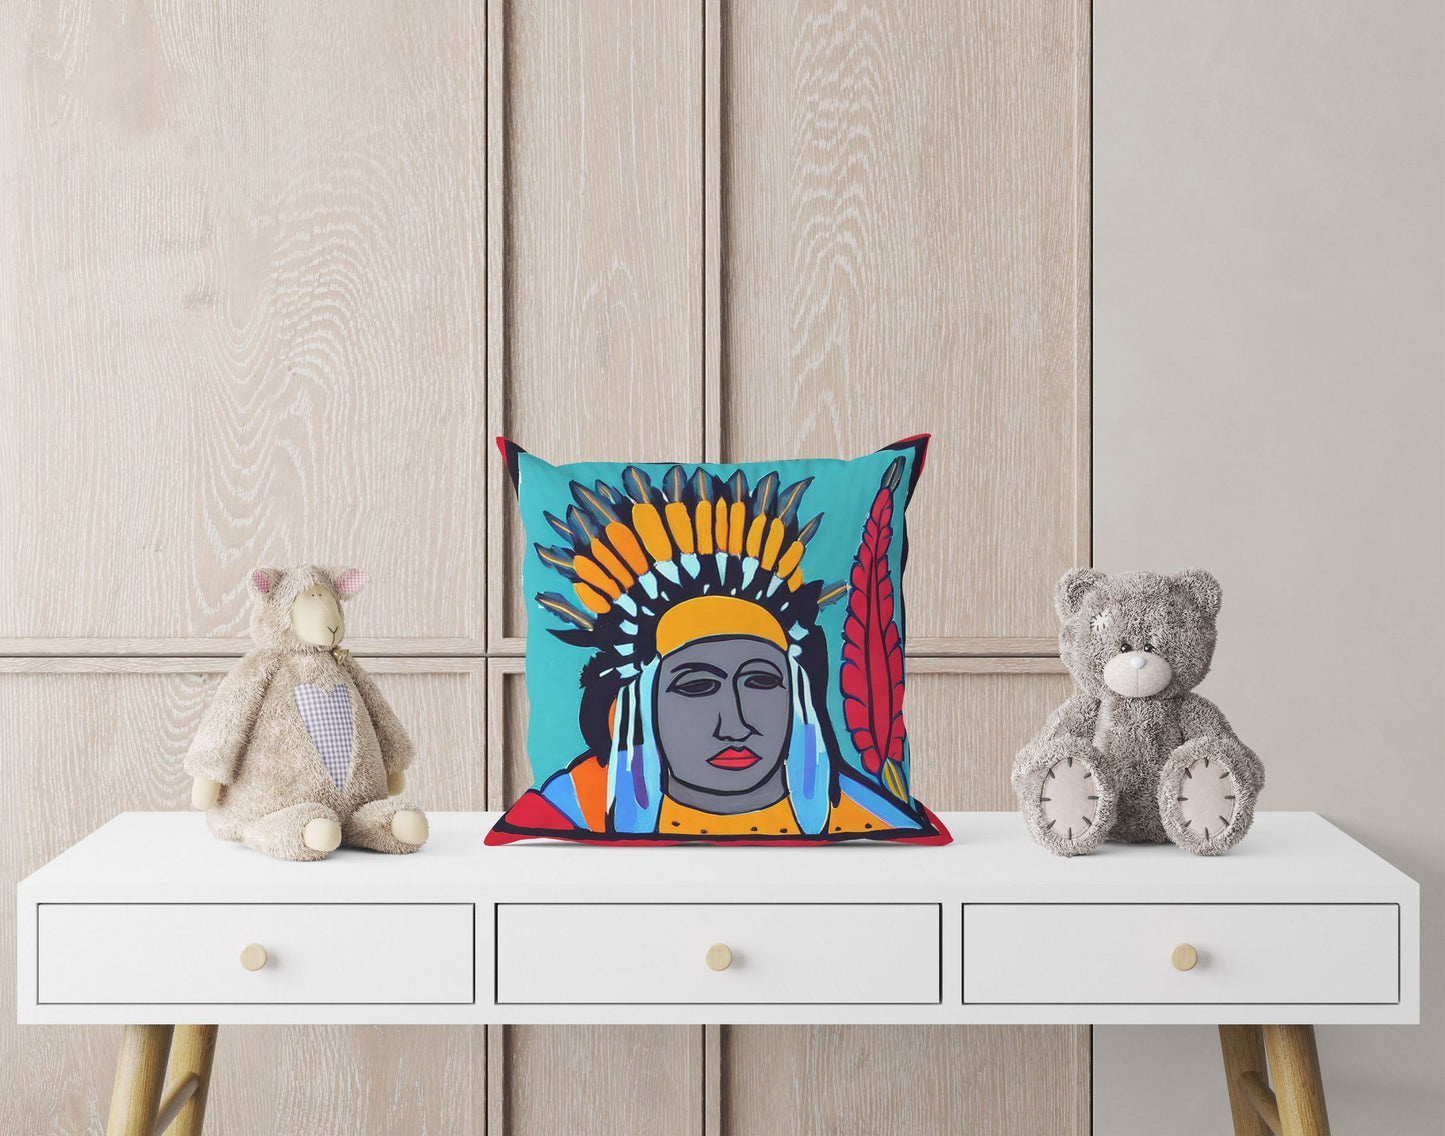 Indian Chief Toss Pillow, Abstract Throw Pillow, Artist Pillow, Colorful Pillow Case, Watercolor Pillow Cases, Square Pillow, Playroom Decor